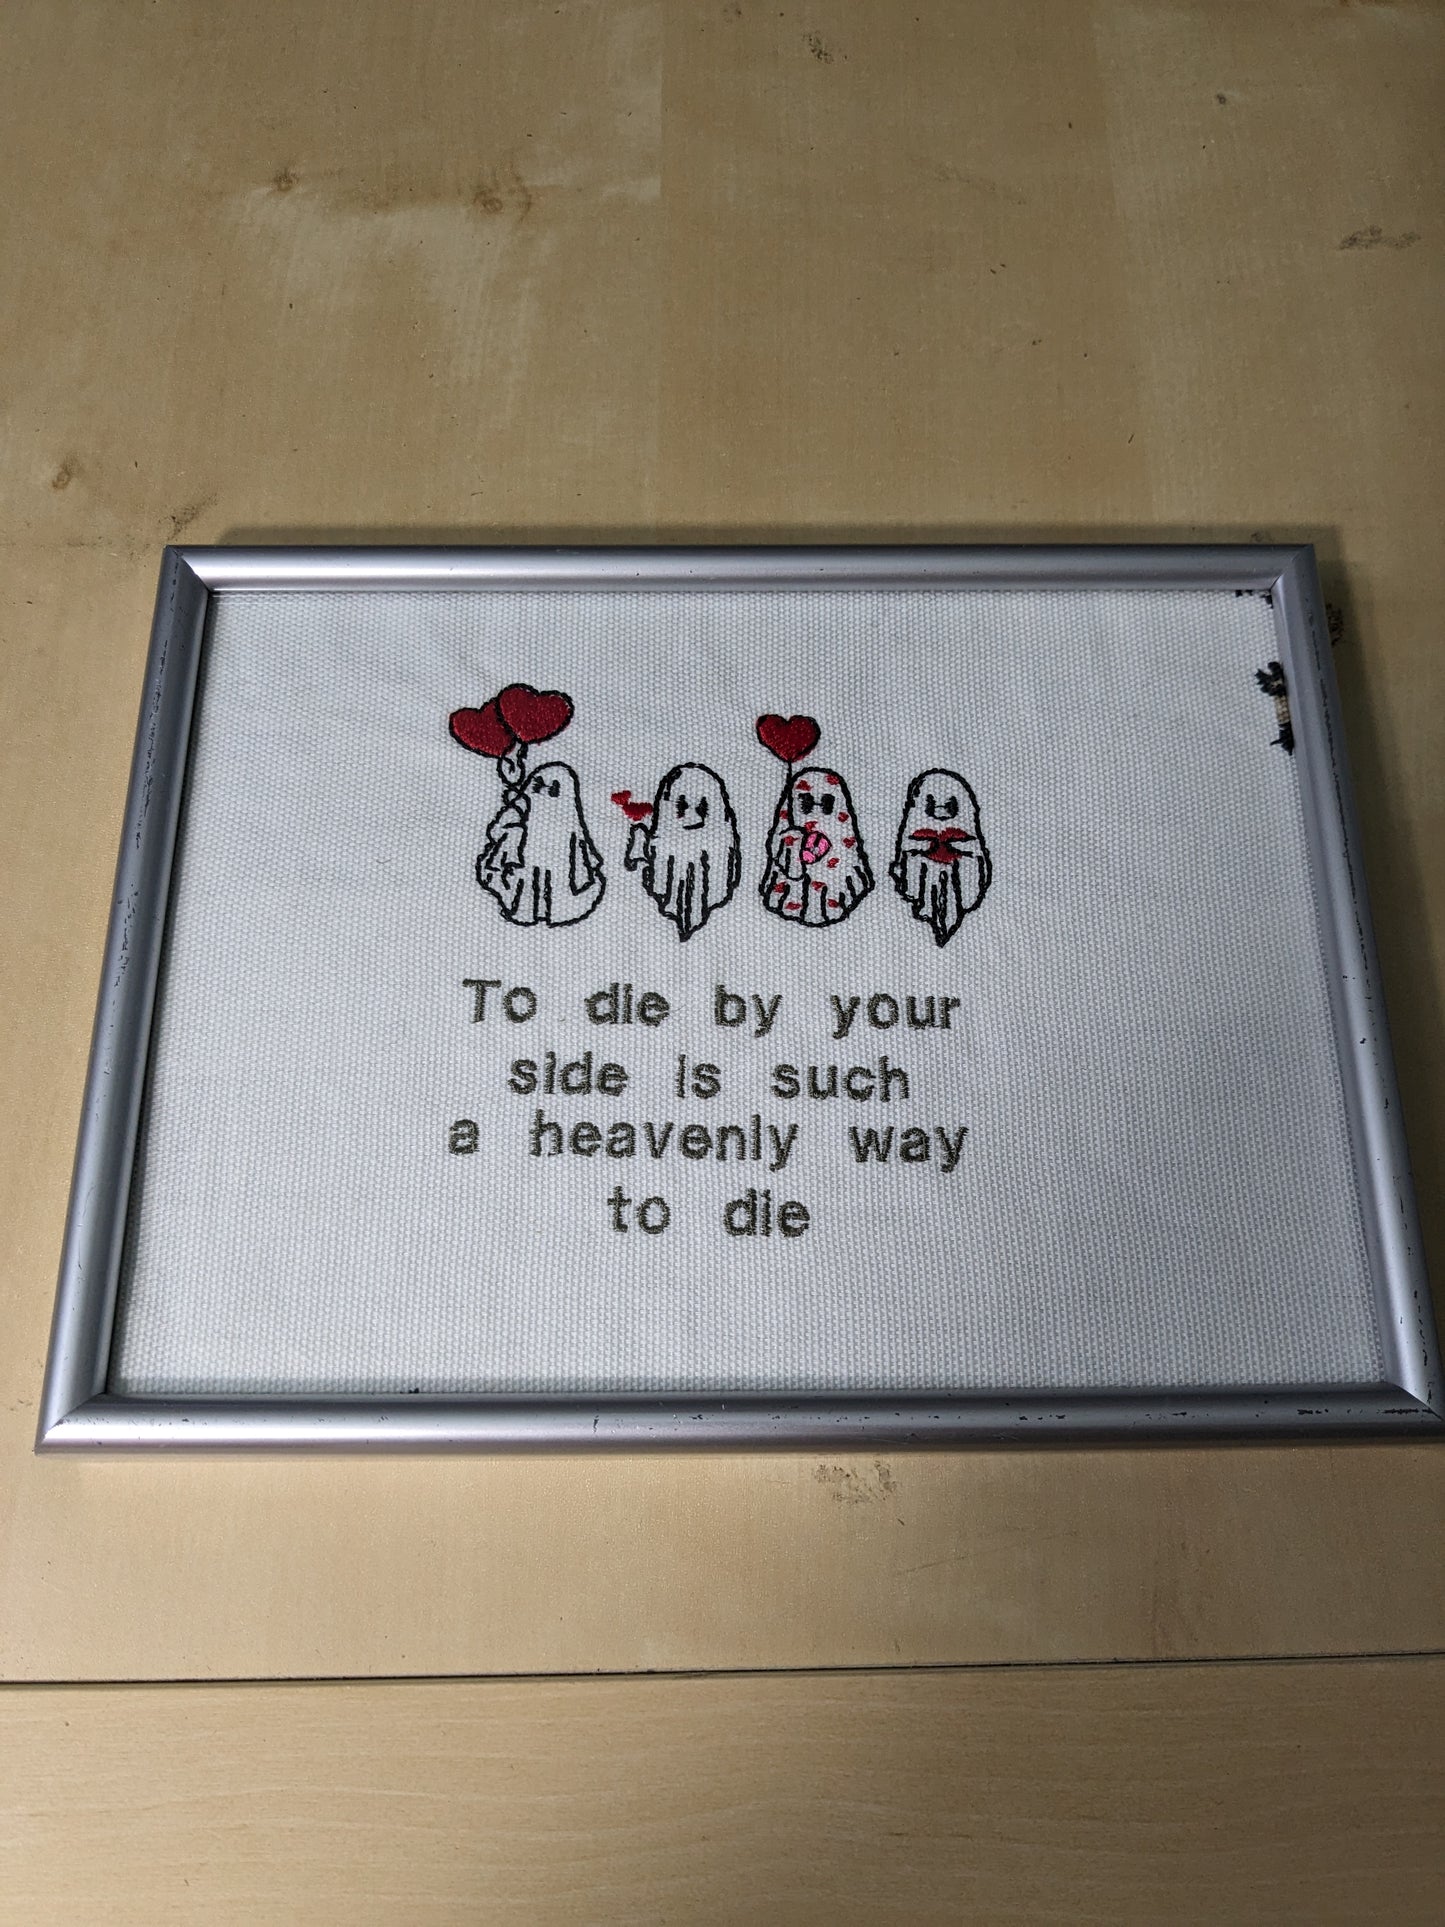 The Smiths Inspired Embroidery Art - Framed Artwork - Ghost Illustrations - Gothic Valentine's Day